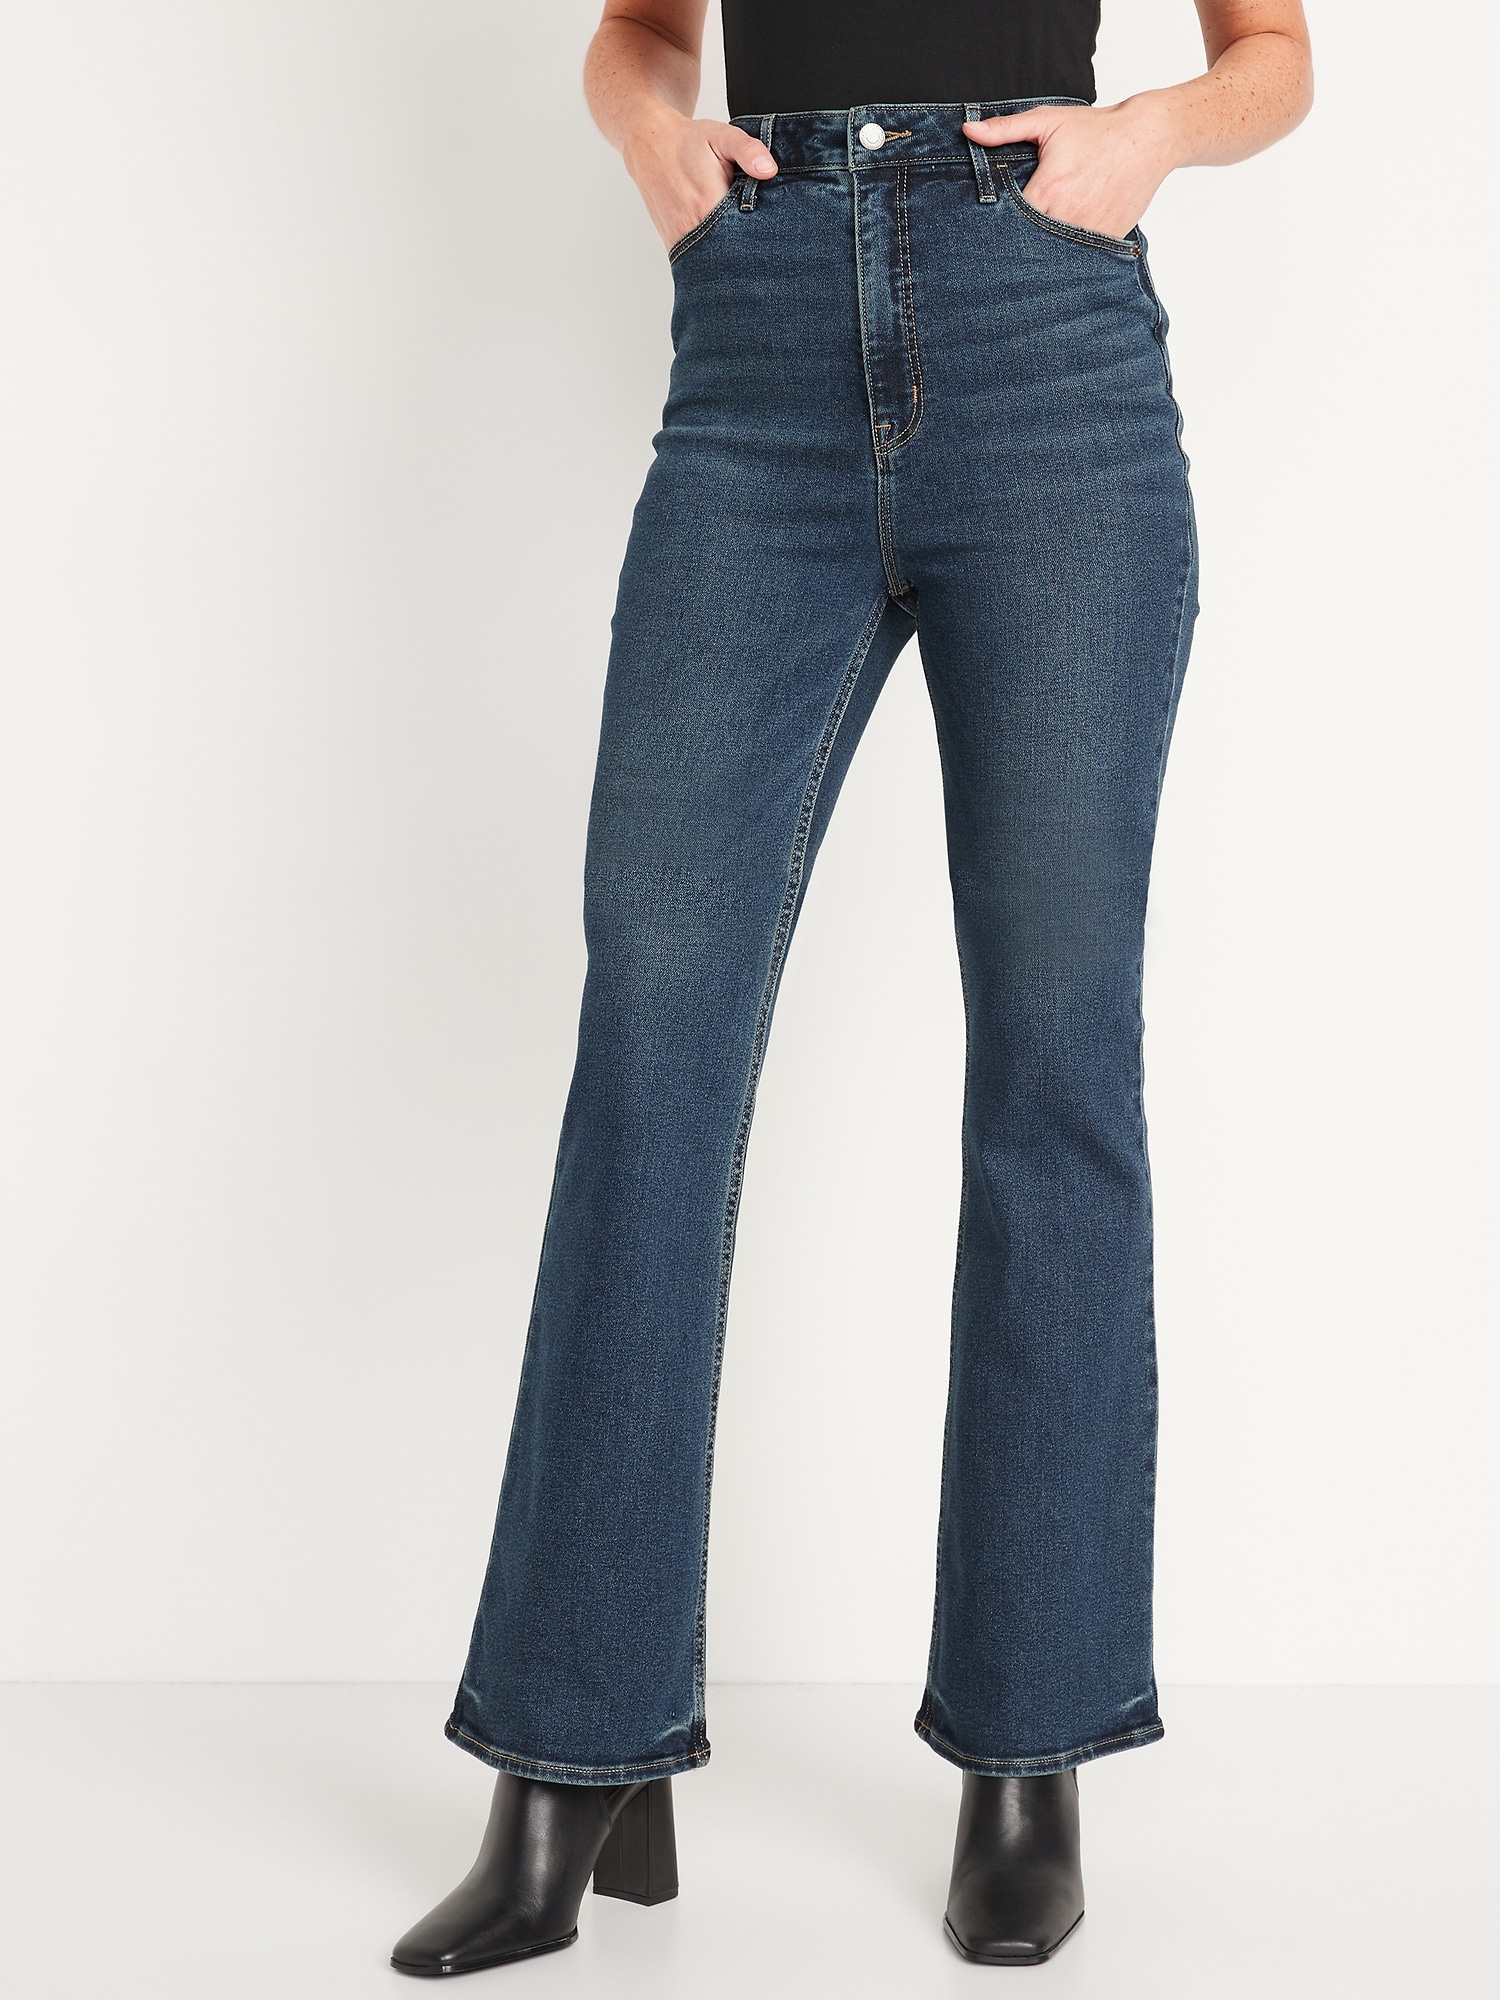 sudden Retire wrench Higher High-Waisted Flare Jeans for Women | Old Navy